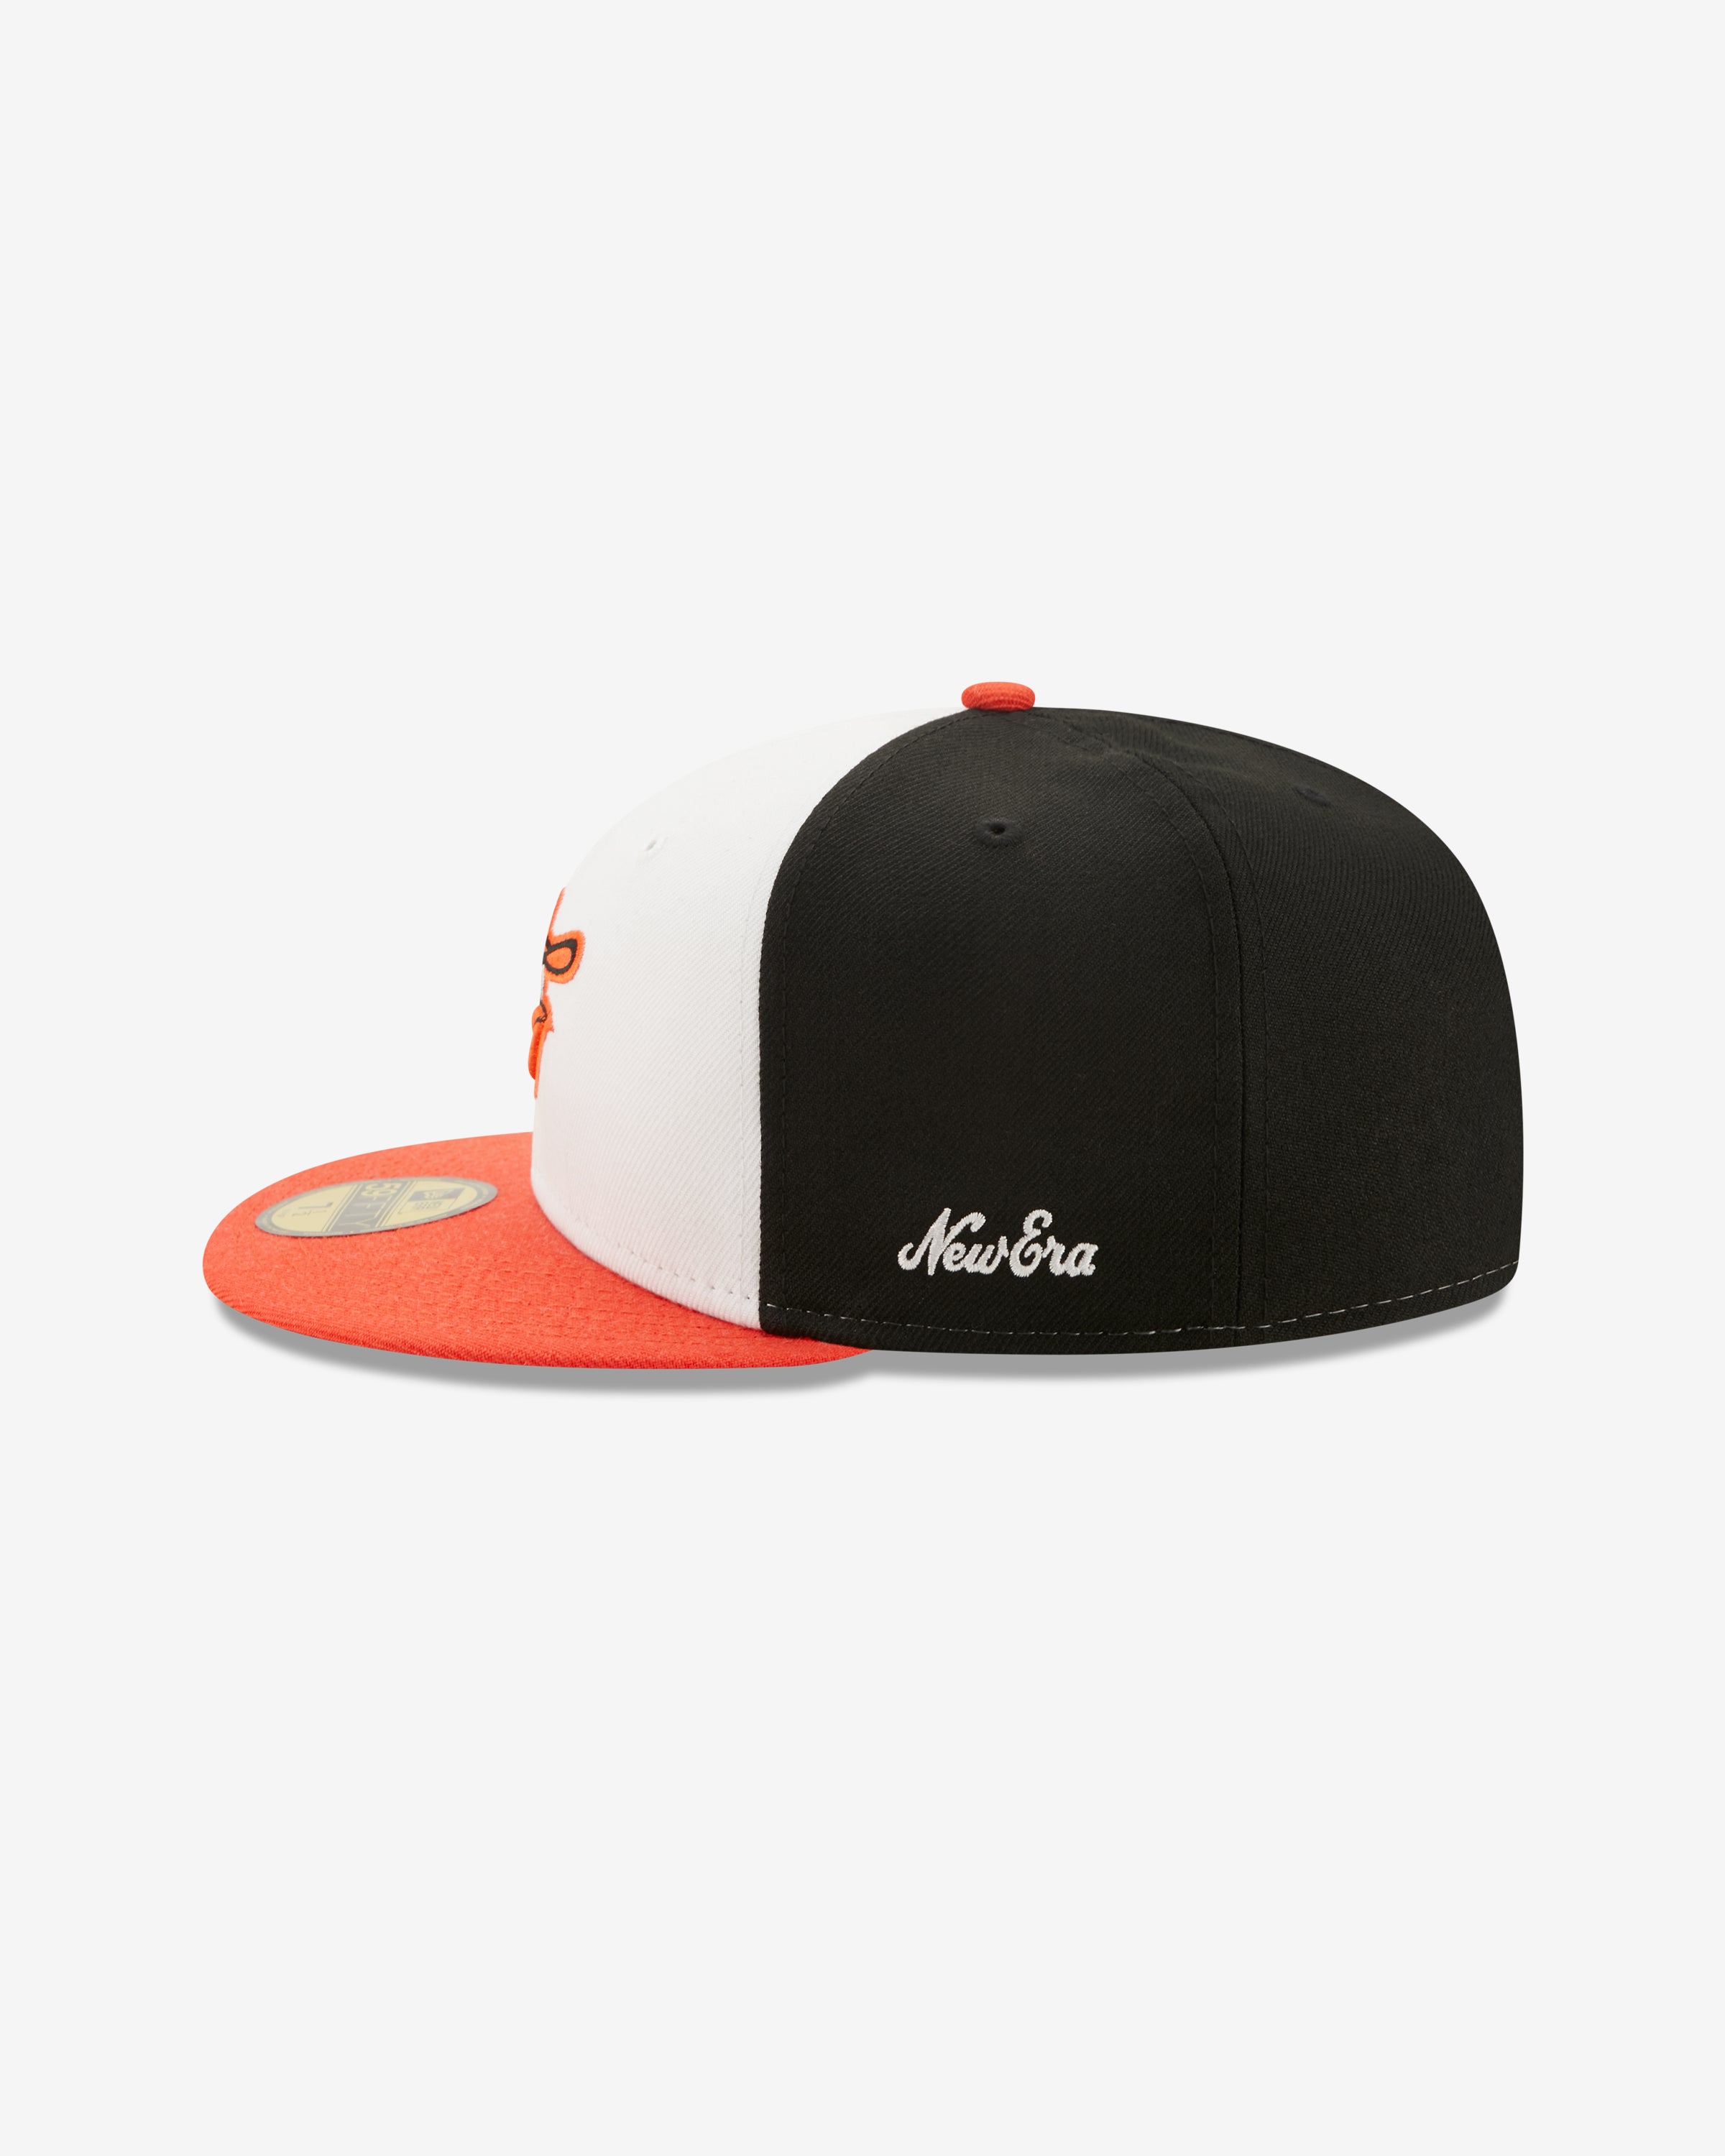 Simple at first look, but bold in the details and the meaning. That's what  the Baltimore Orioles City Connect is all about. 🟠